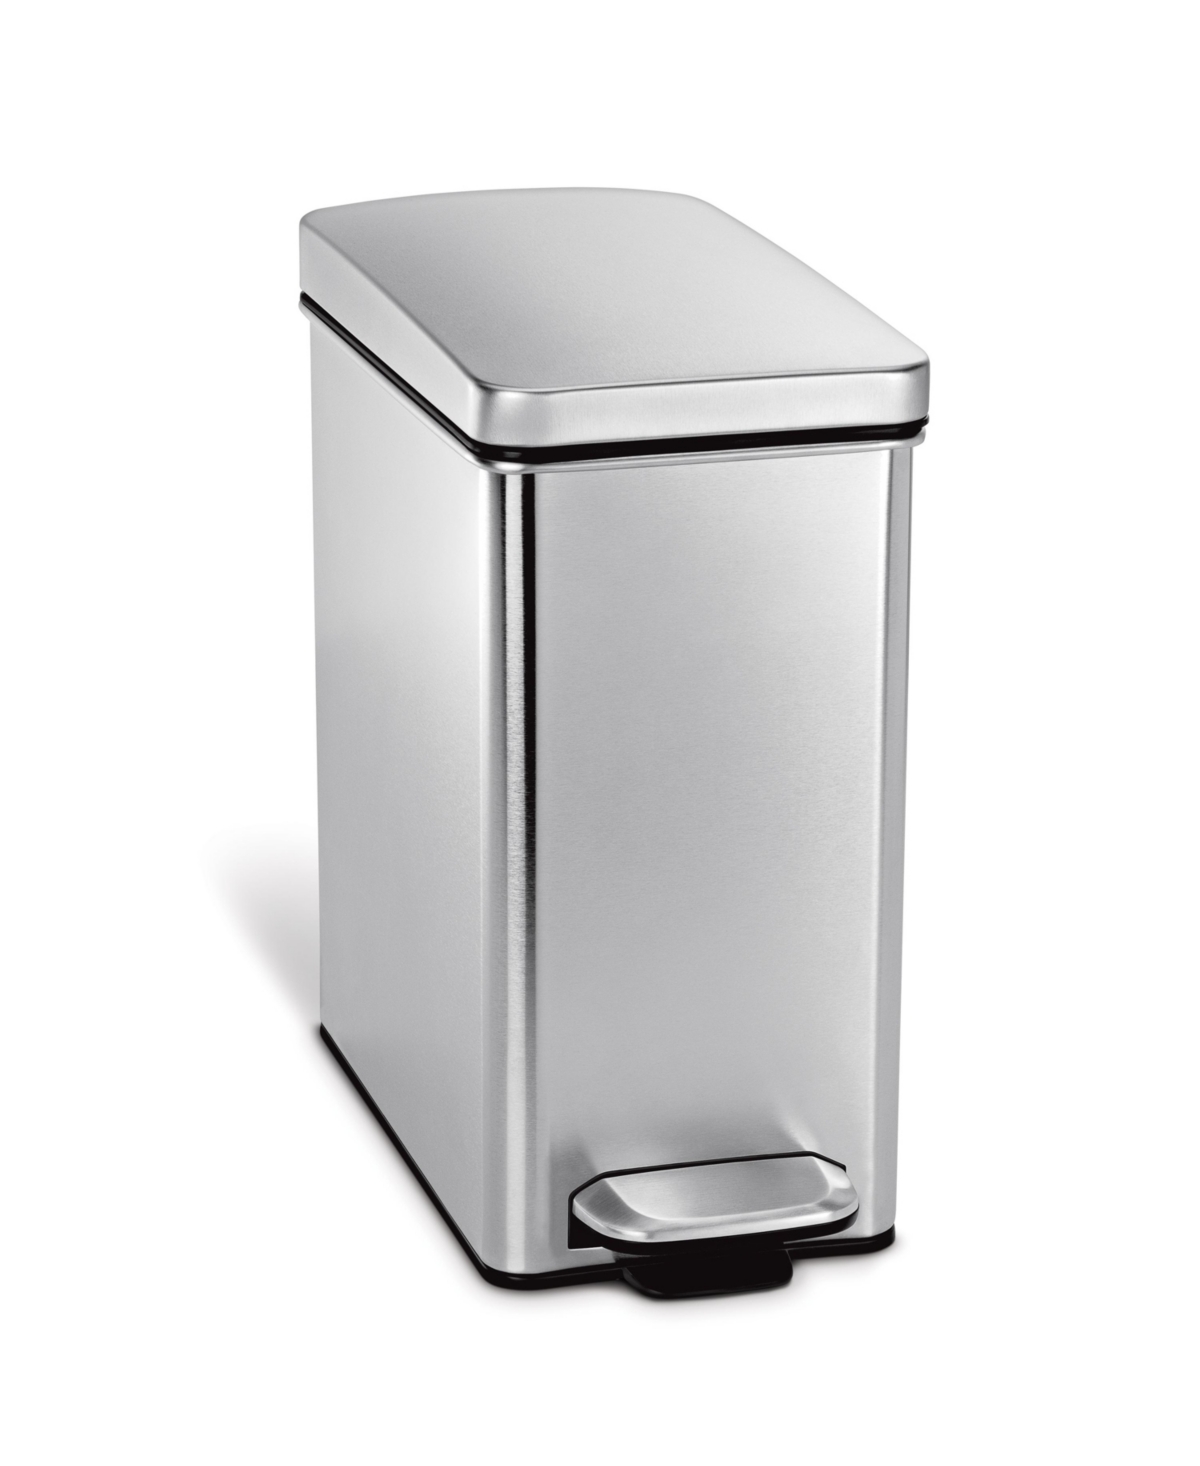 Simplehuman Profile Step Trash Can, 10 Liters In Brushed Stainless Steel